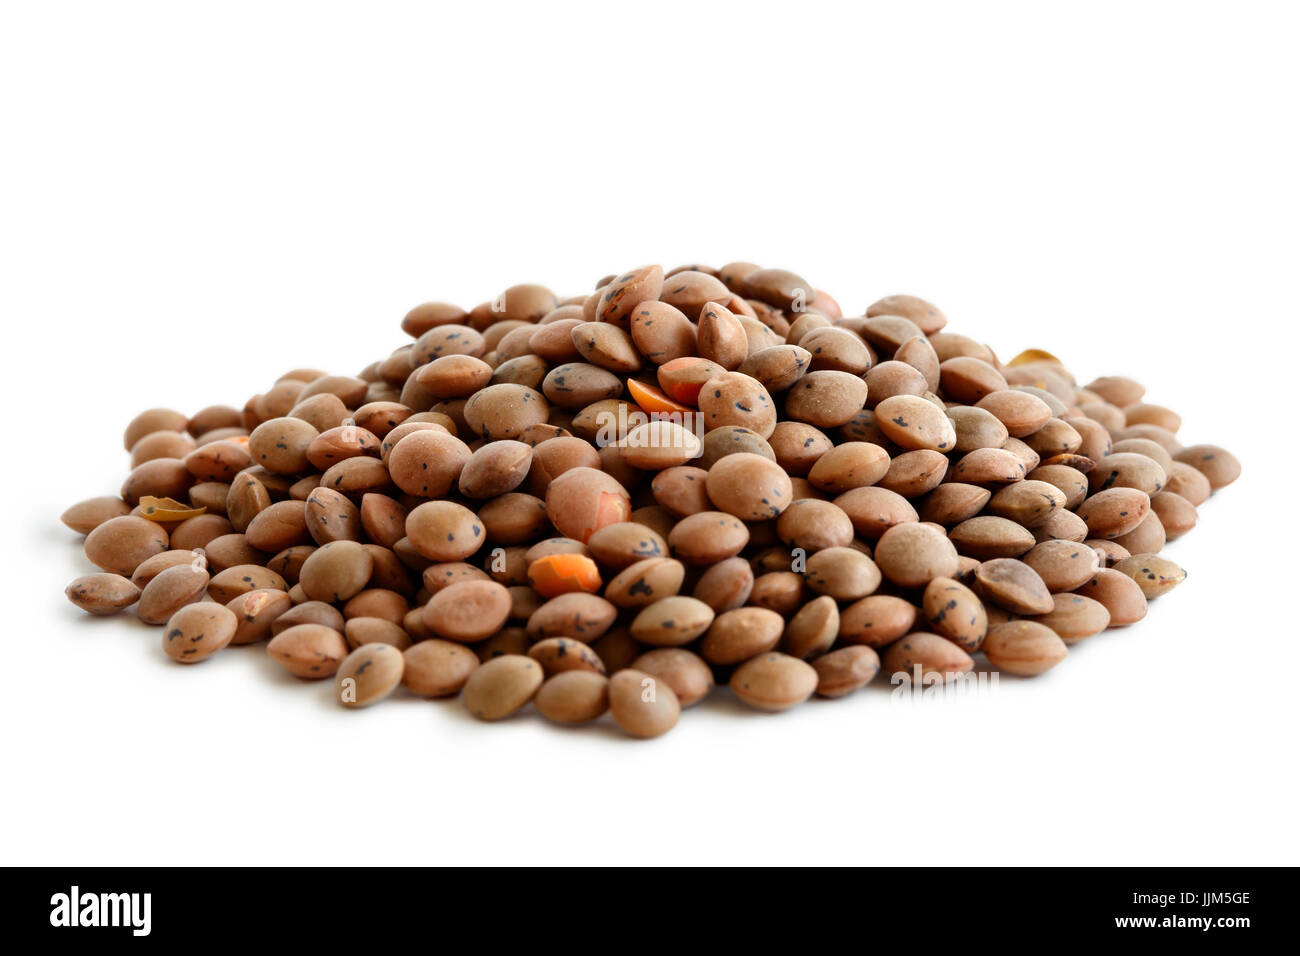 Heap of unpeeled red lentils isolated on white. Stock Photo